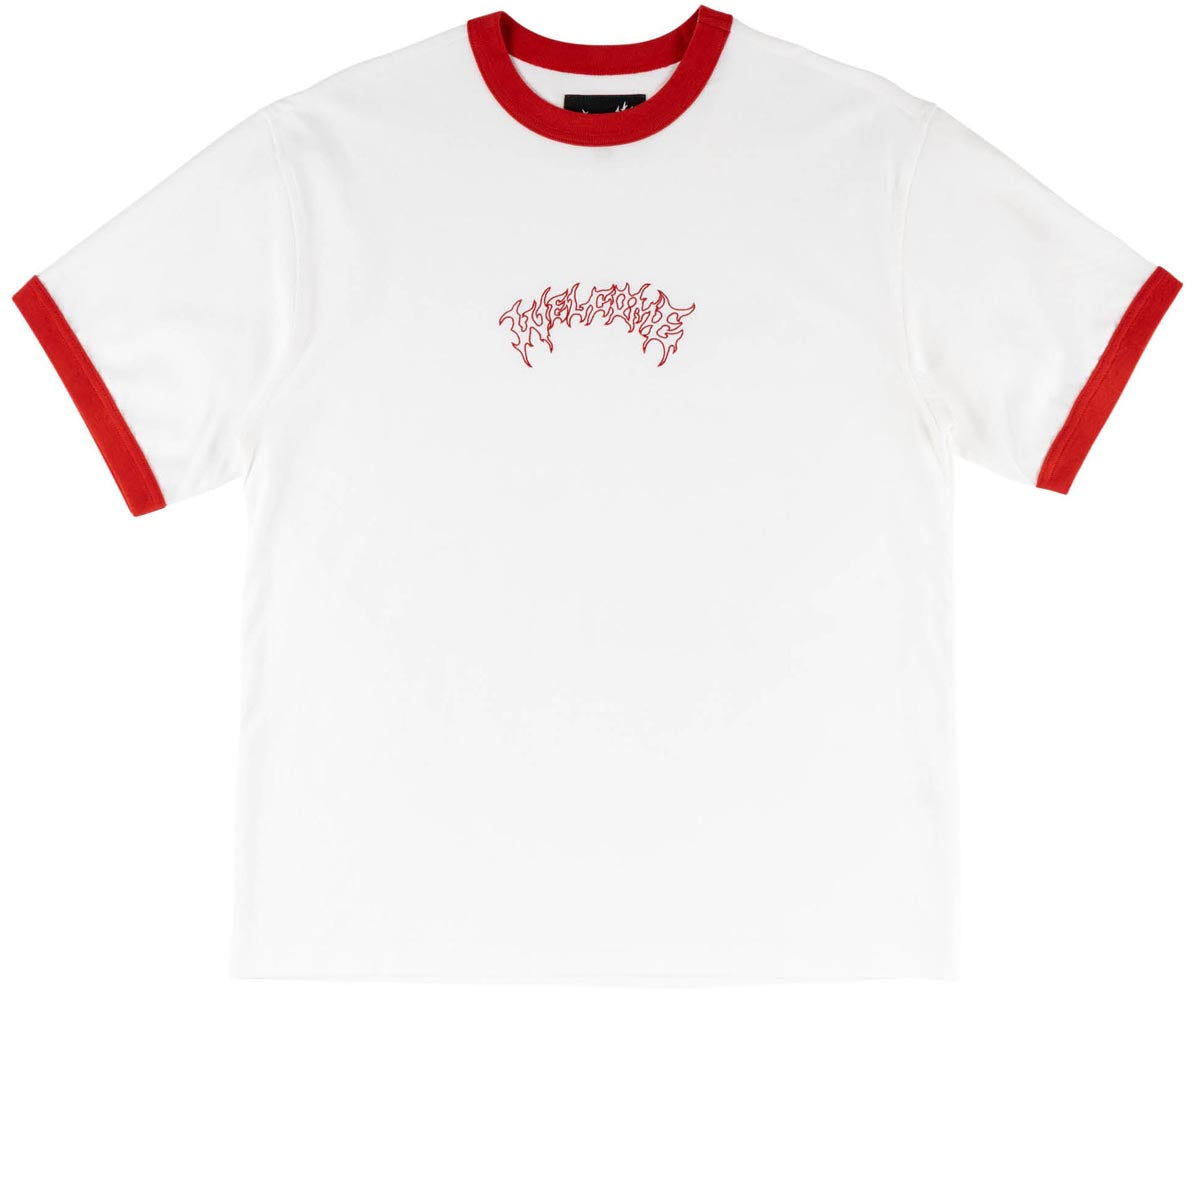 Welcome Barb Ringer T-Shirt - White/Red image 1